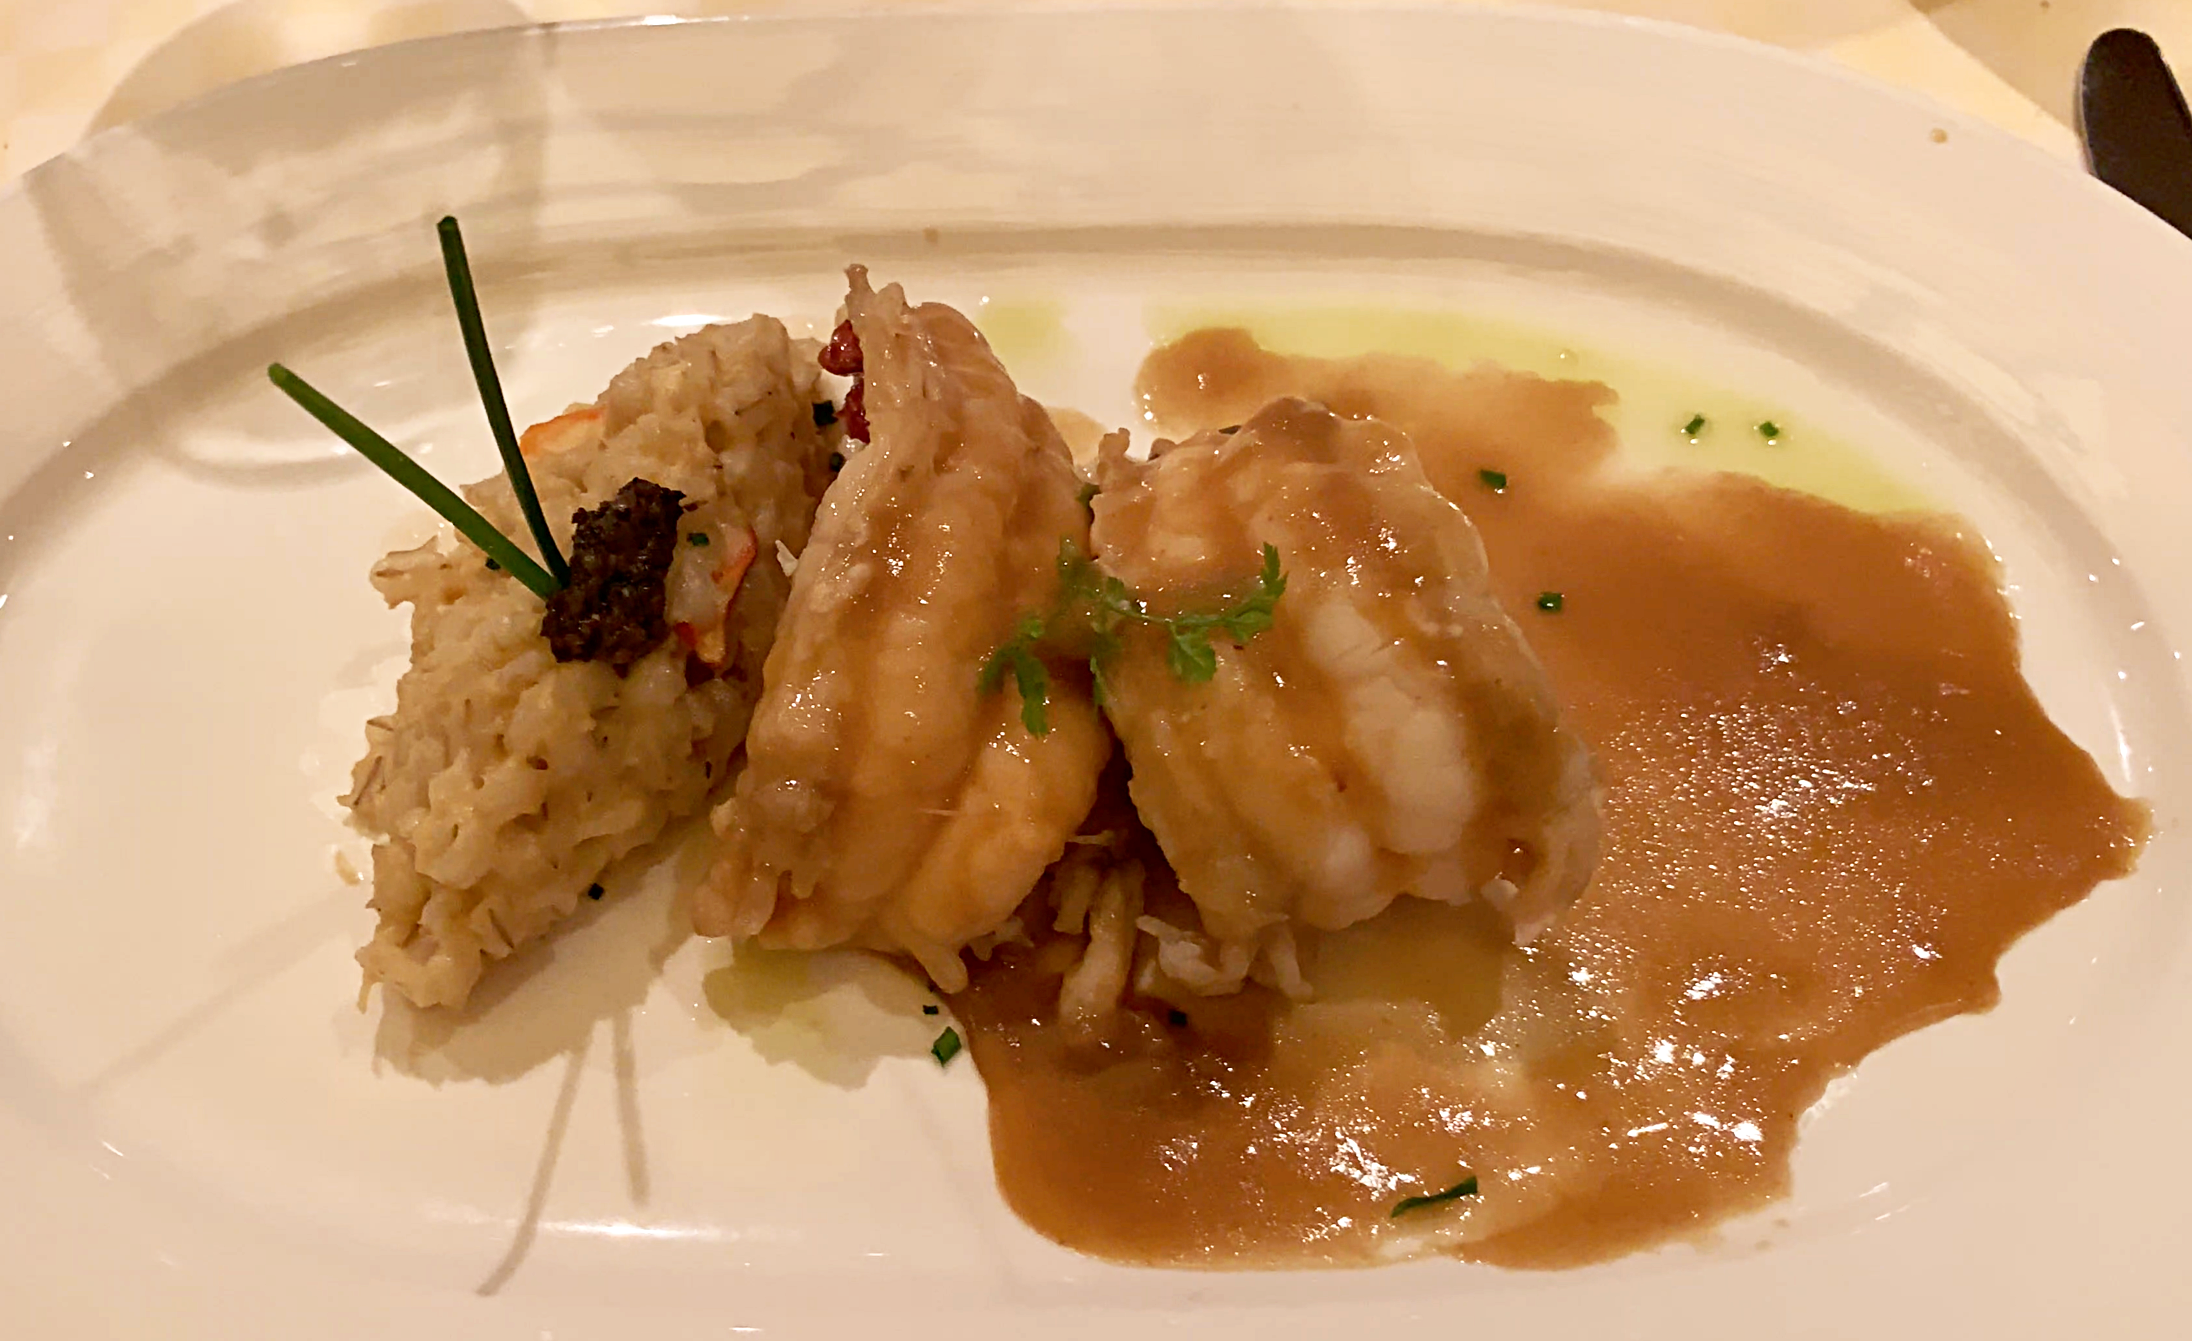  Sabatinis Lobster tail with risotto.  